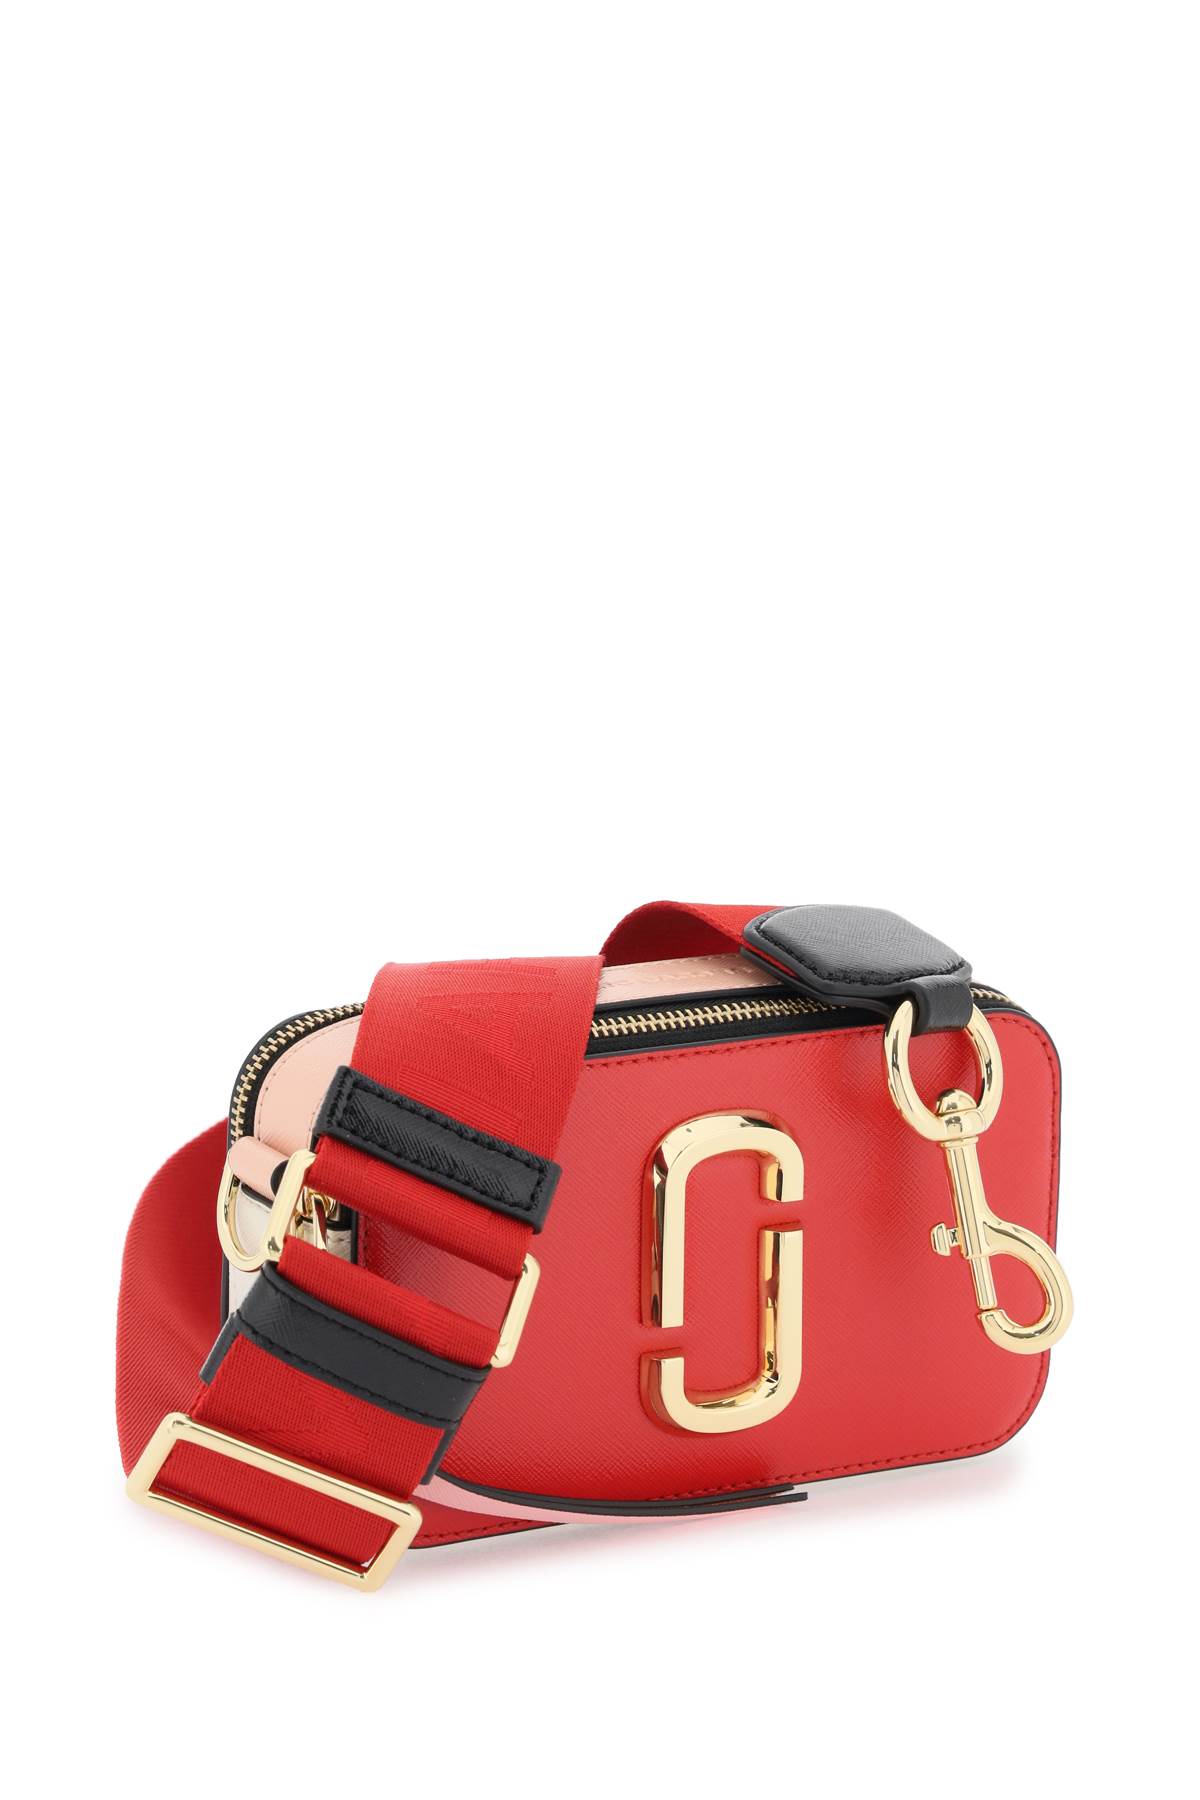 Marc Jacobs, Bags, Marc Jacobs Snapshot Camera Bag Black Red Colorblock  New With Dust Bag